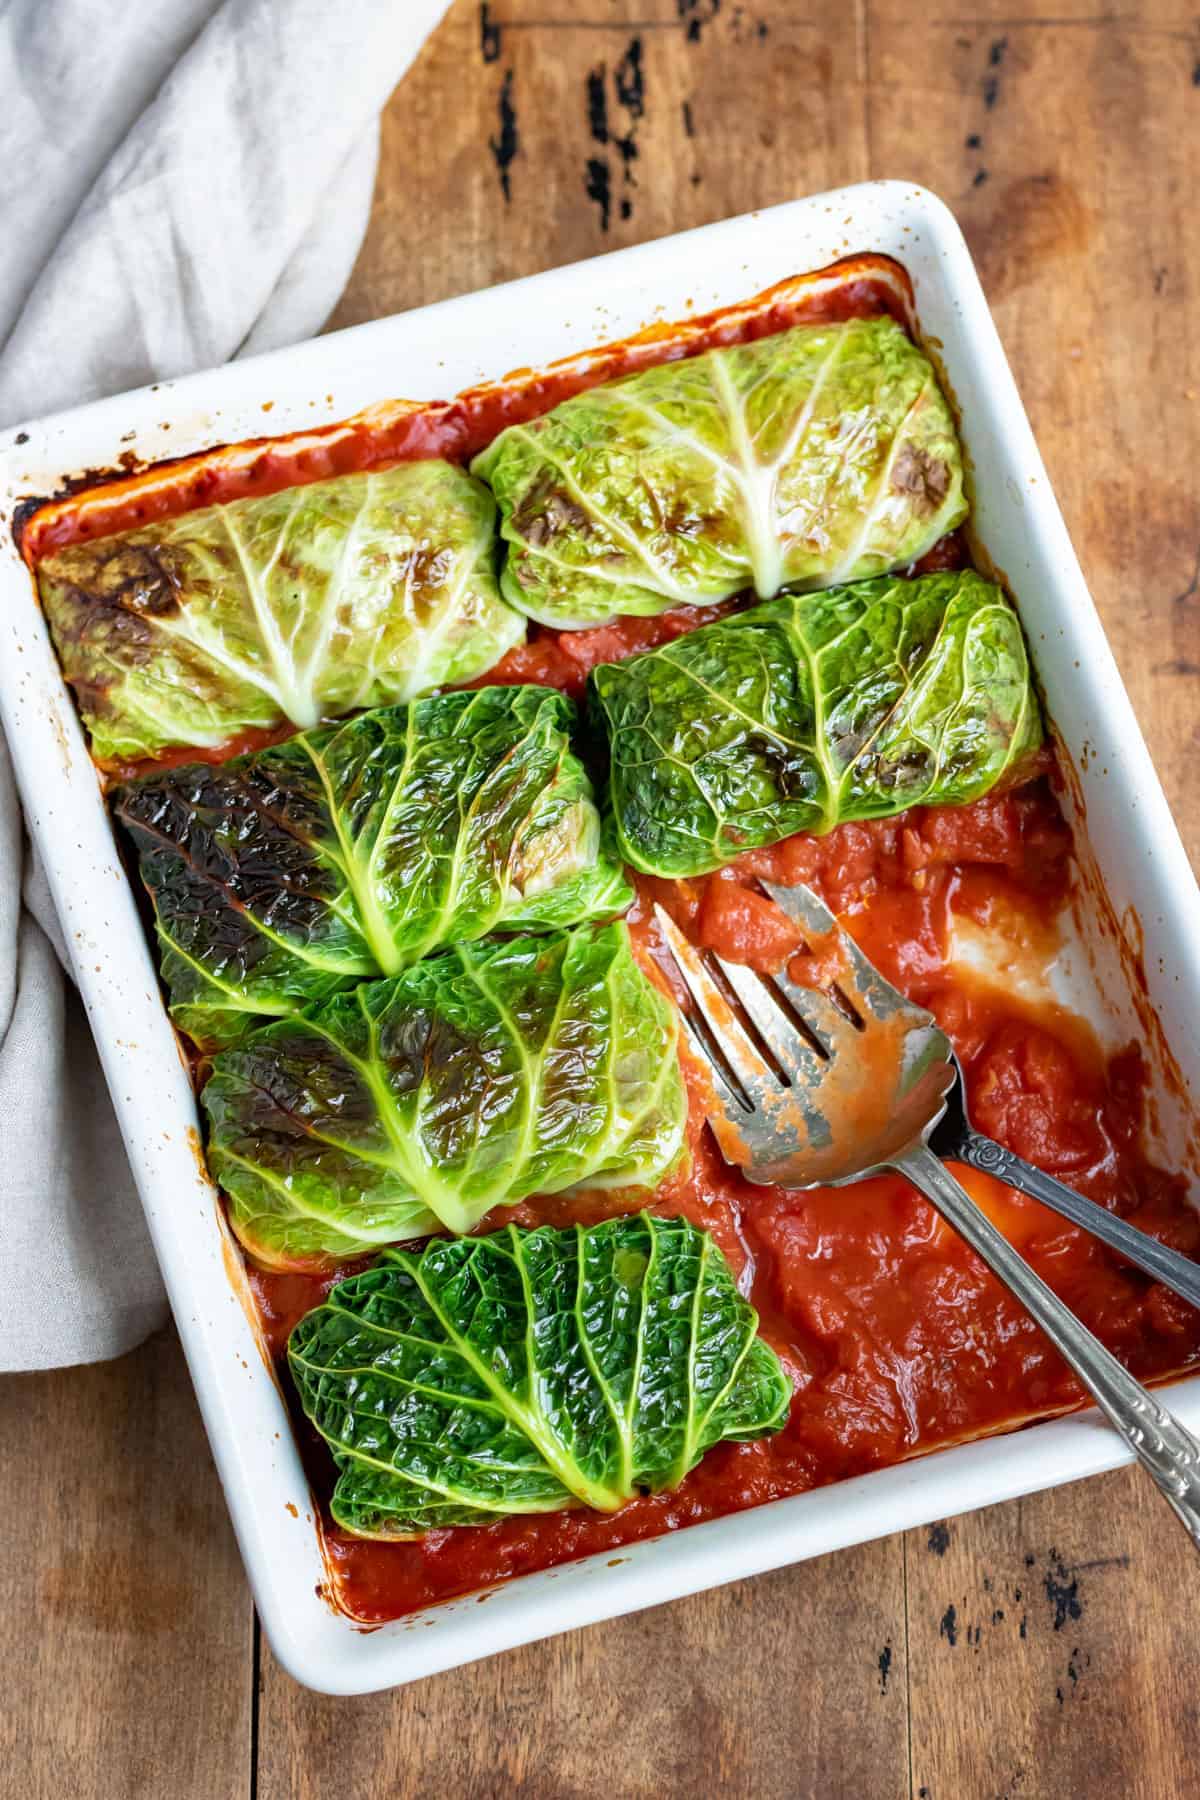 Beautifuly green cabbage rolls with rice stuffing